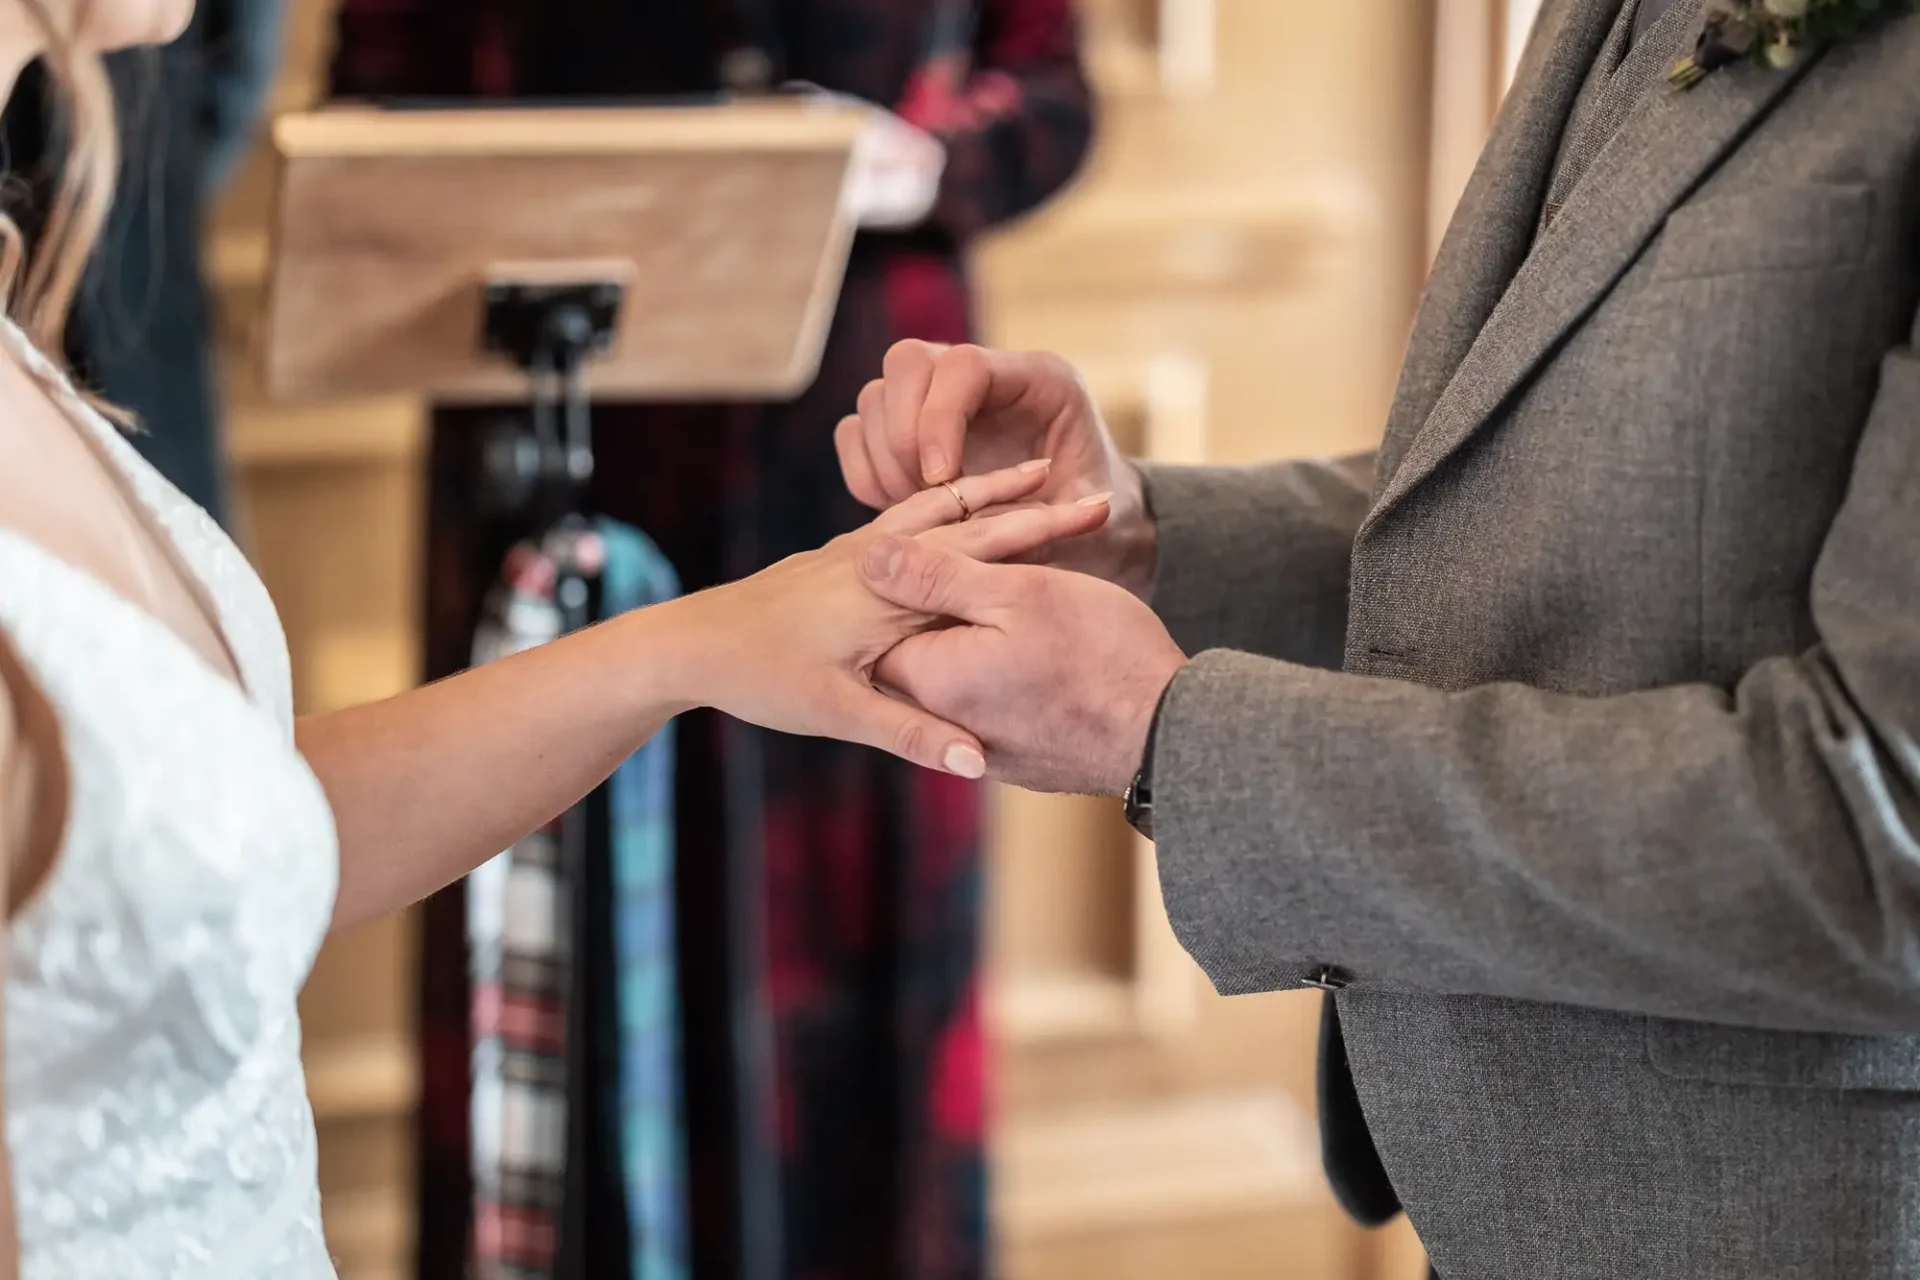 Bride and groom holding hands during a wedding ceremony, with the groom placing a ring on the bride's finger.